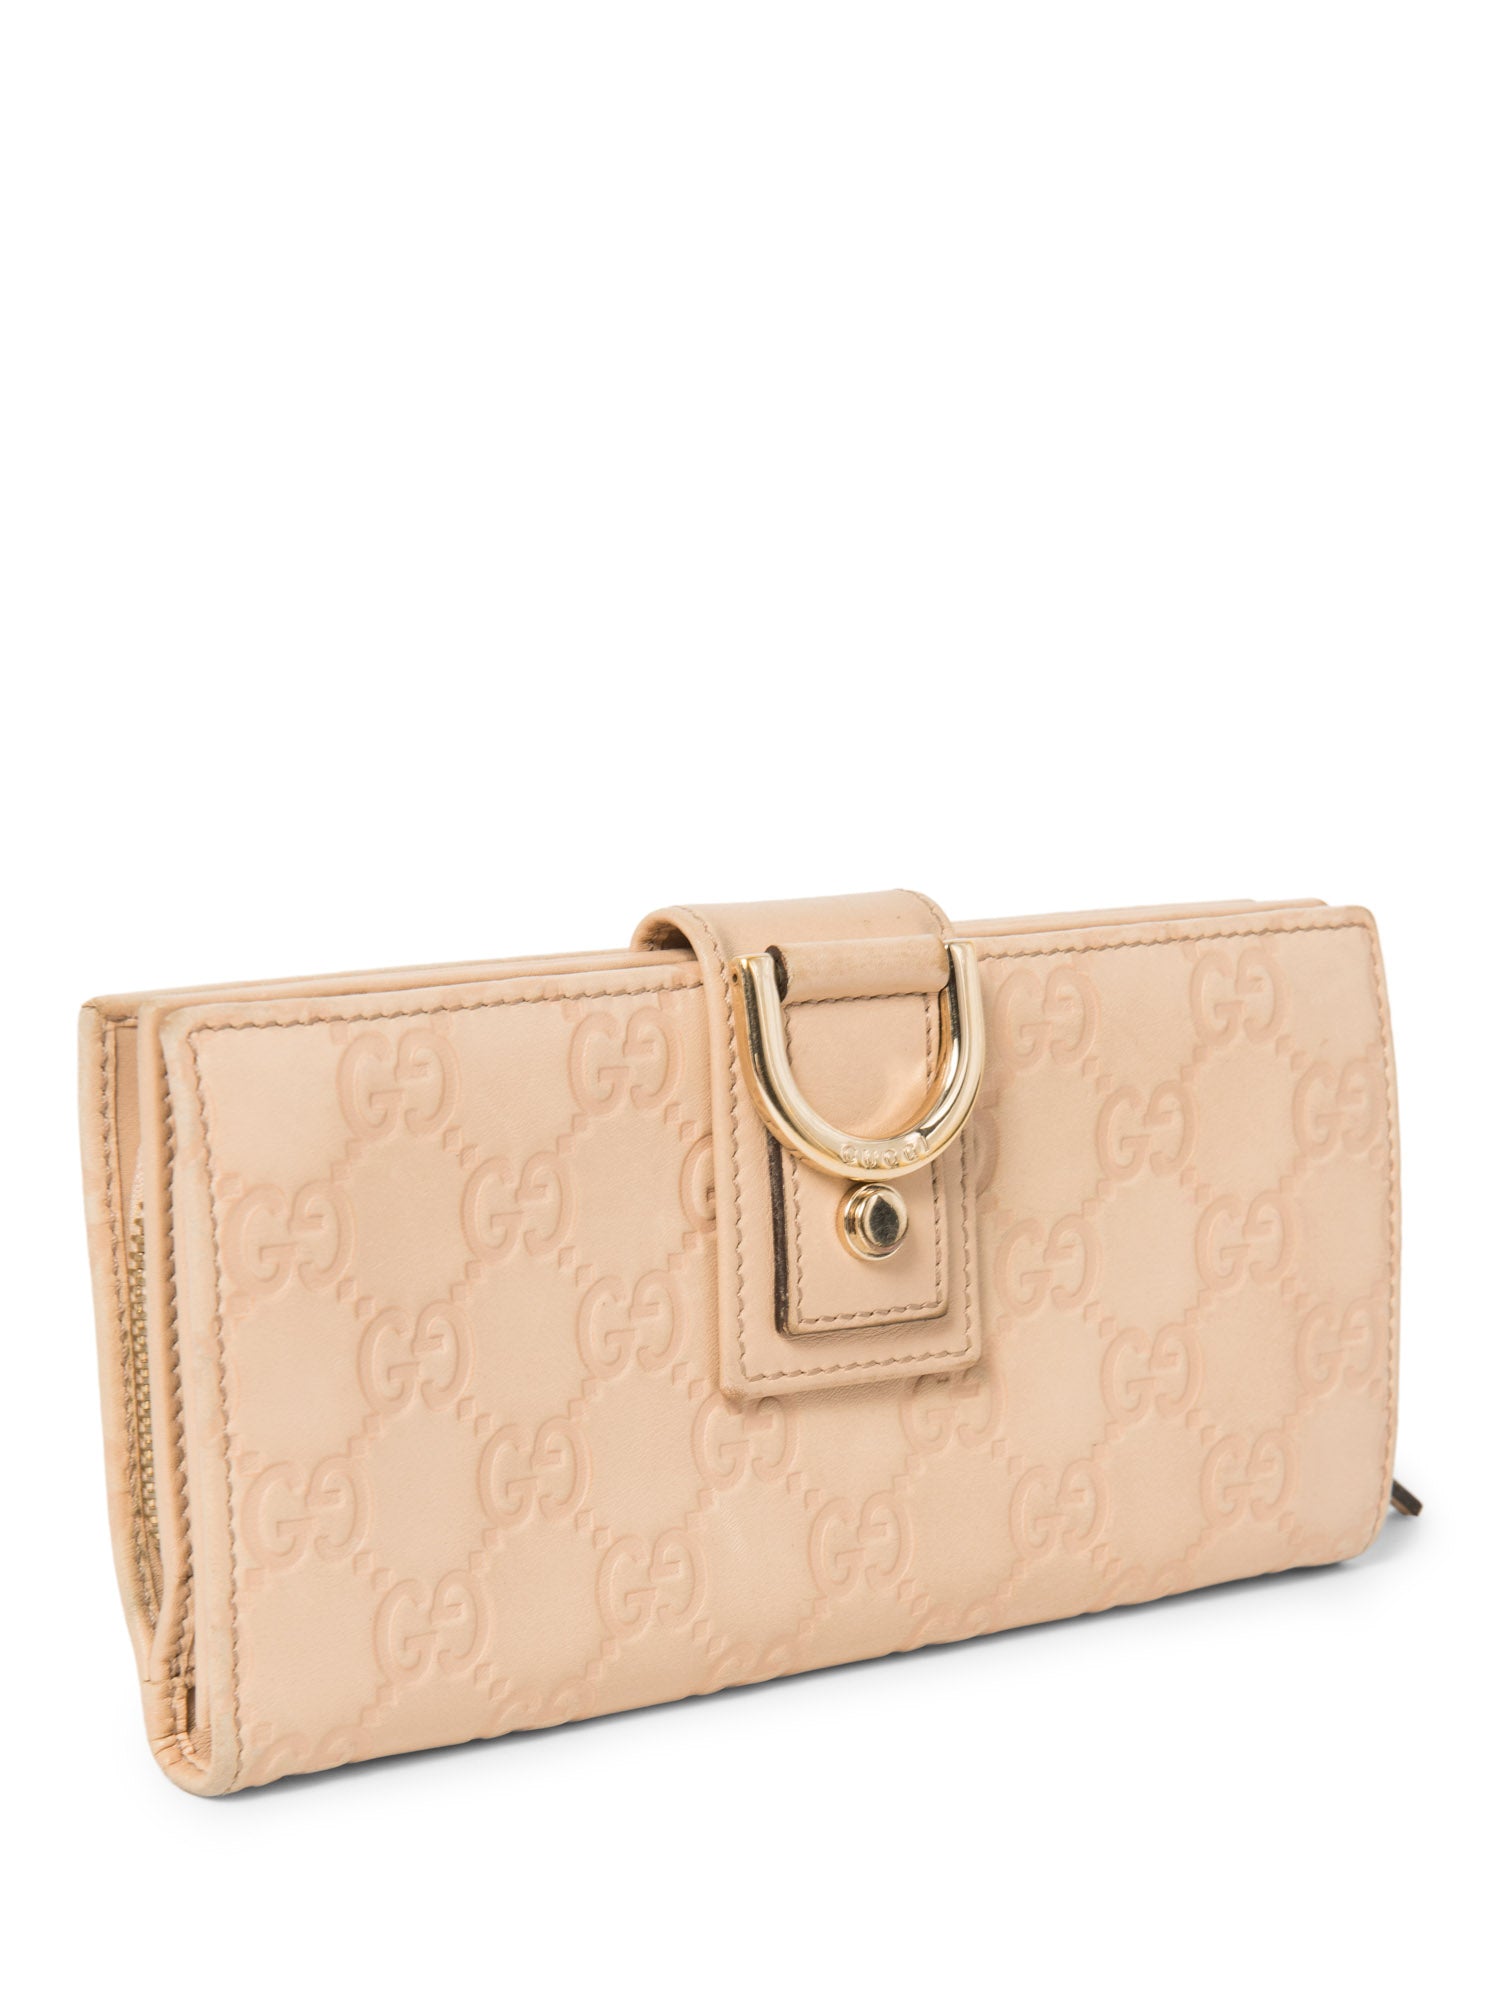 Gucci GG Supreme Leather Embossed Buckle Wallet Blush Pink Gold